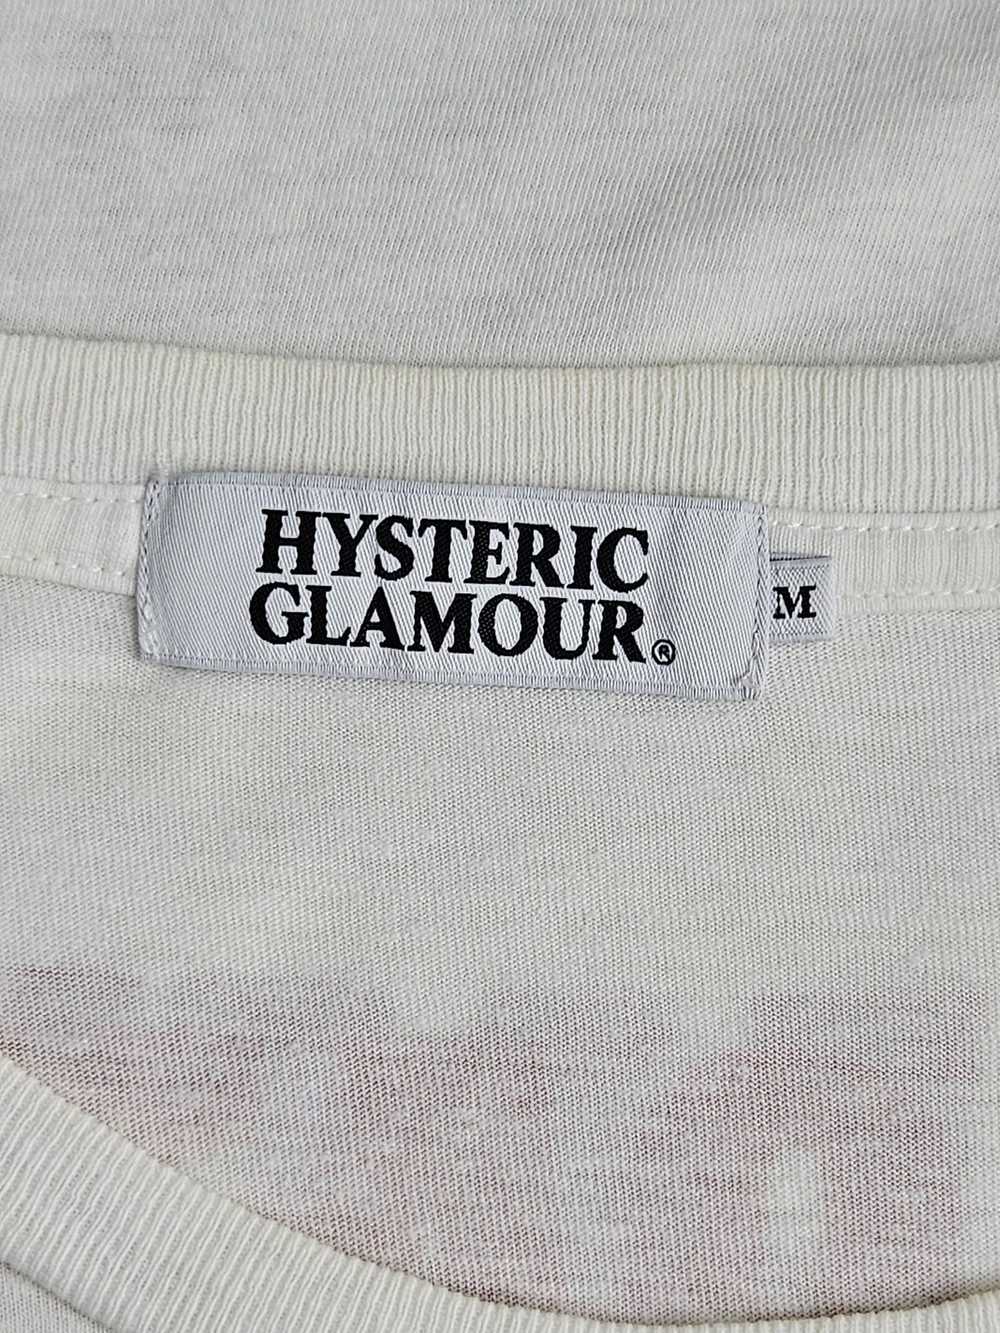 Hysteric Glamour Hysteric Glamour Cat Scratch Fev… - image 6